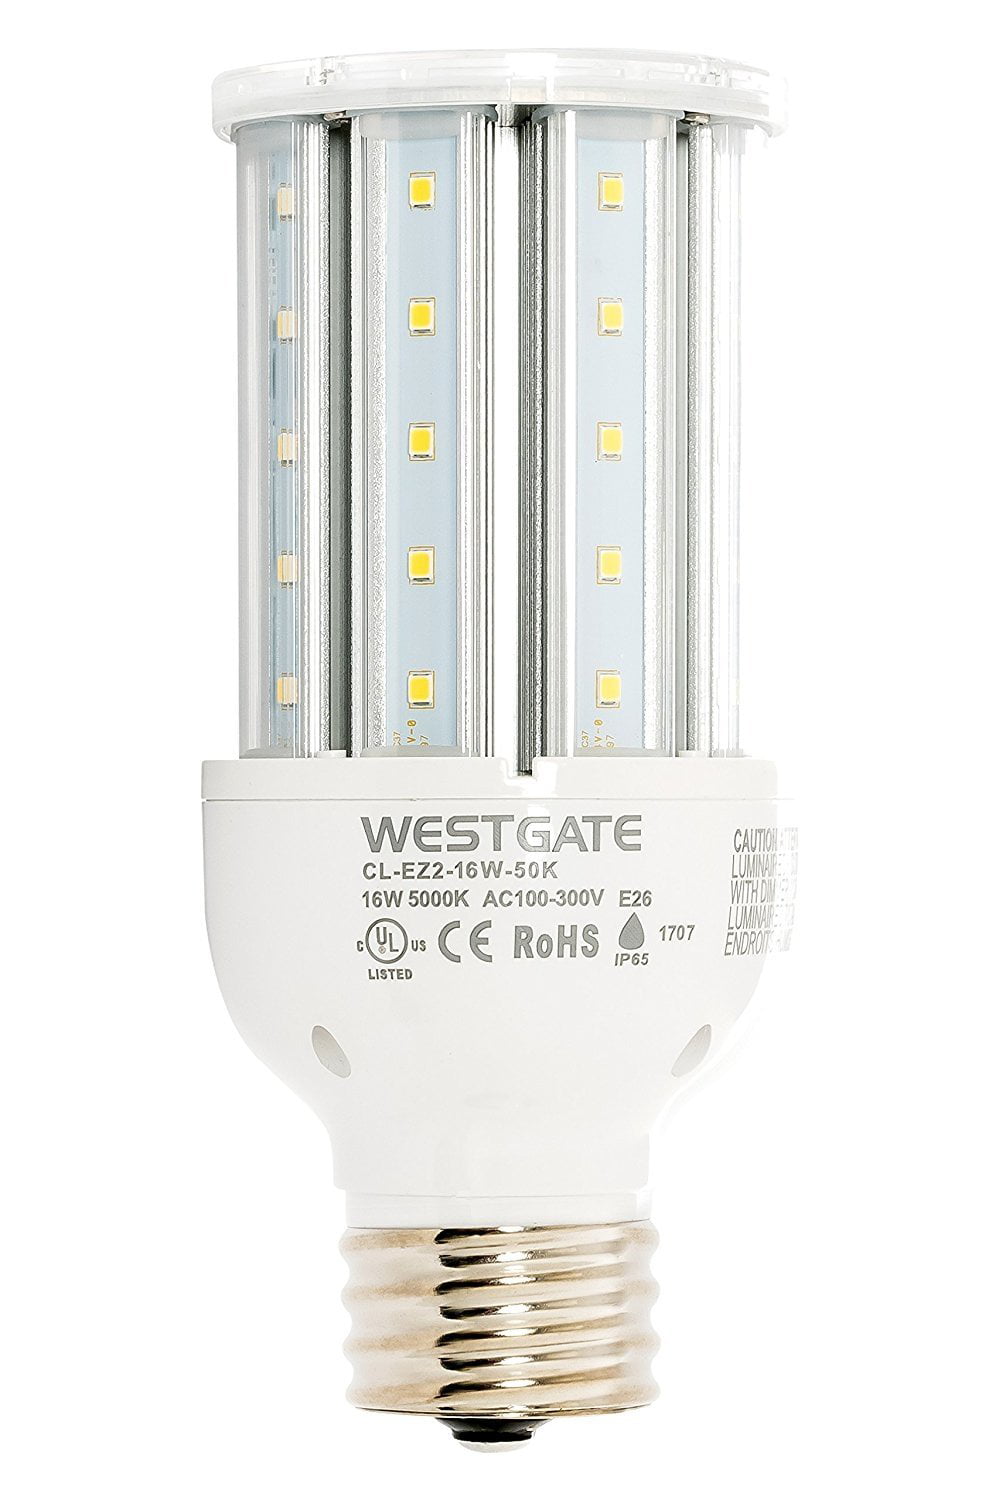 Westgate MR16 LED Light Bulb Dimmable 20 Colors With Remote Control 